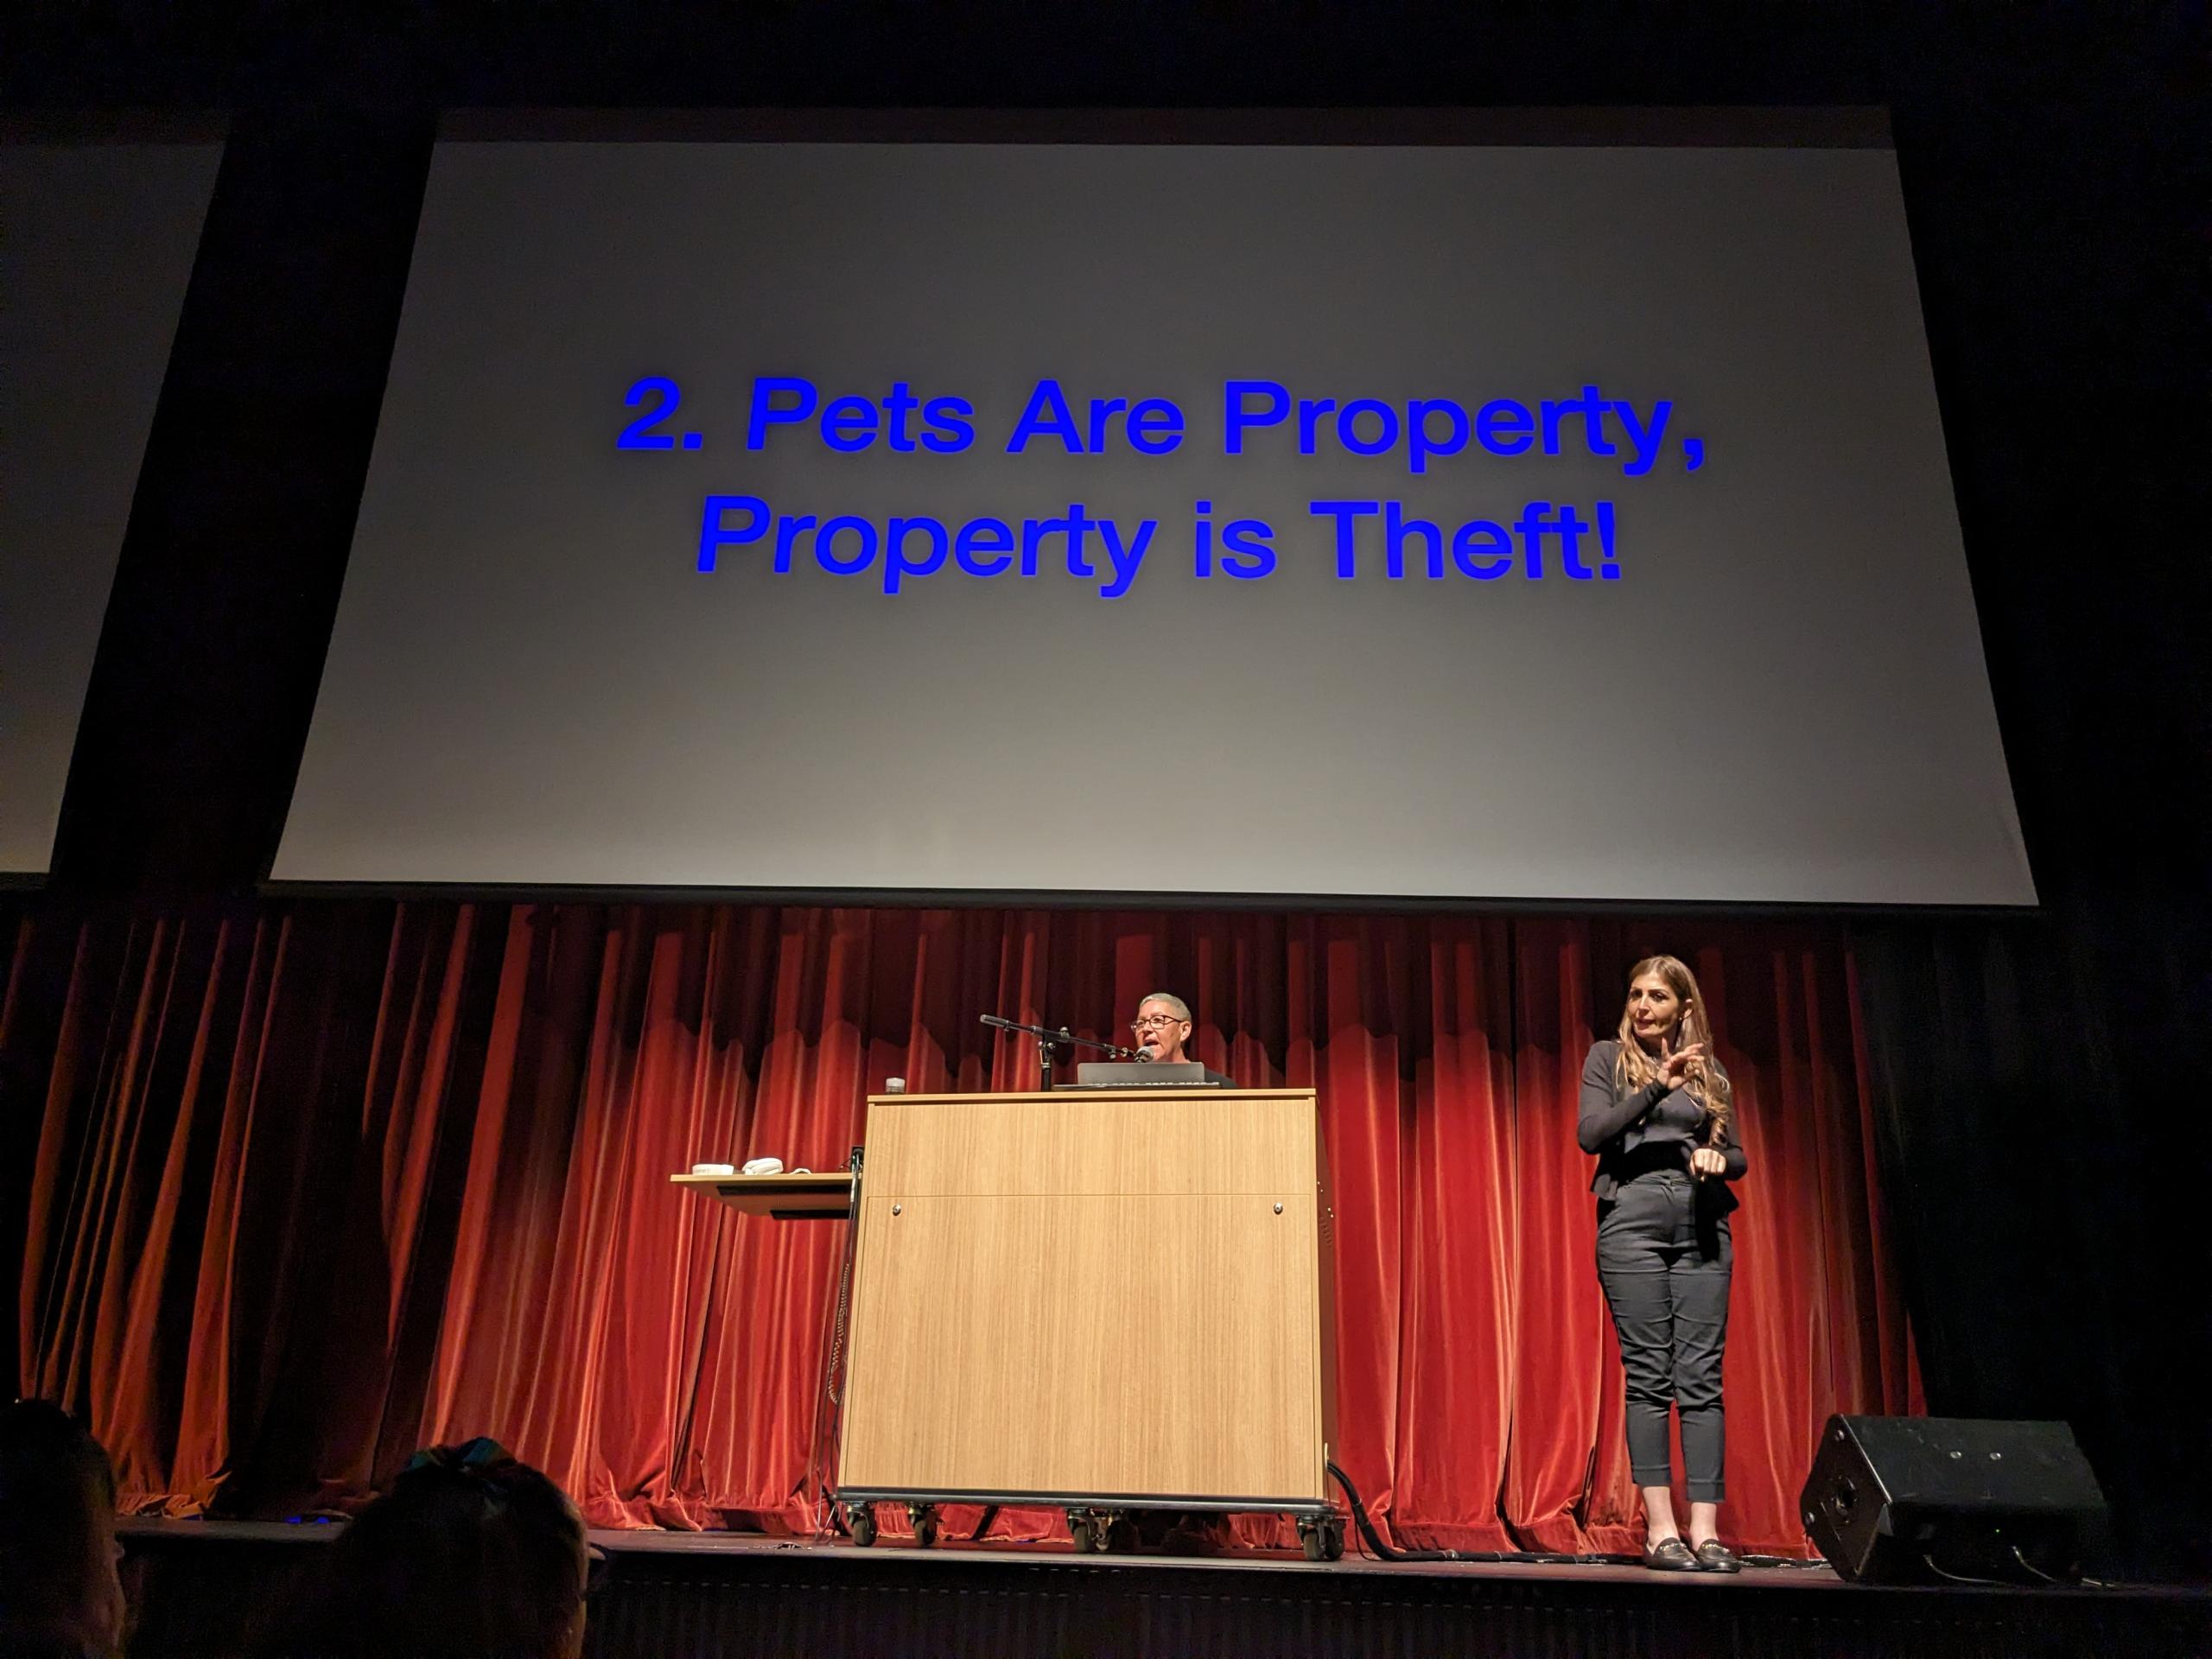 Jack Halberstam at a lectern delivering a PowerPoint presentation. The slide behind him reads "Pets Are Property, Property is Theft!"